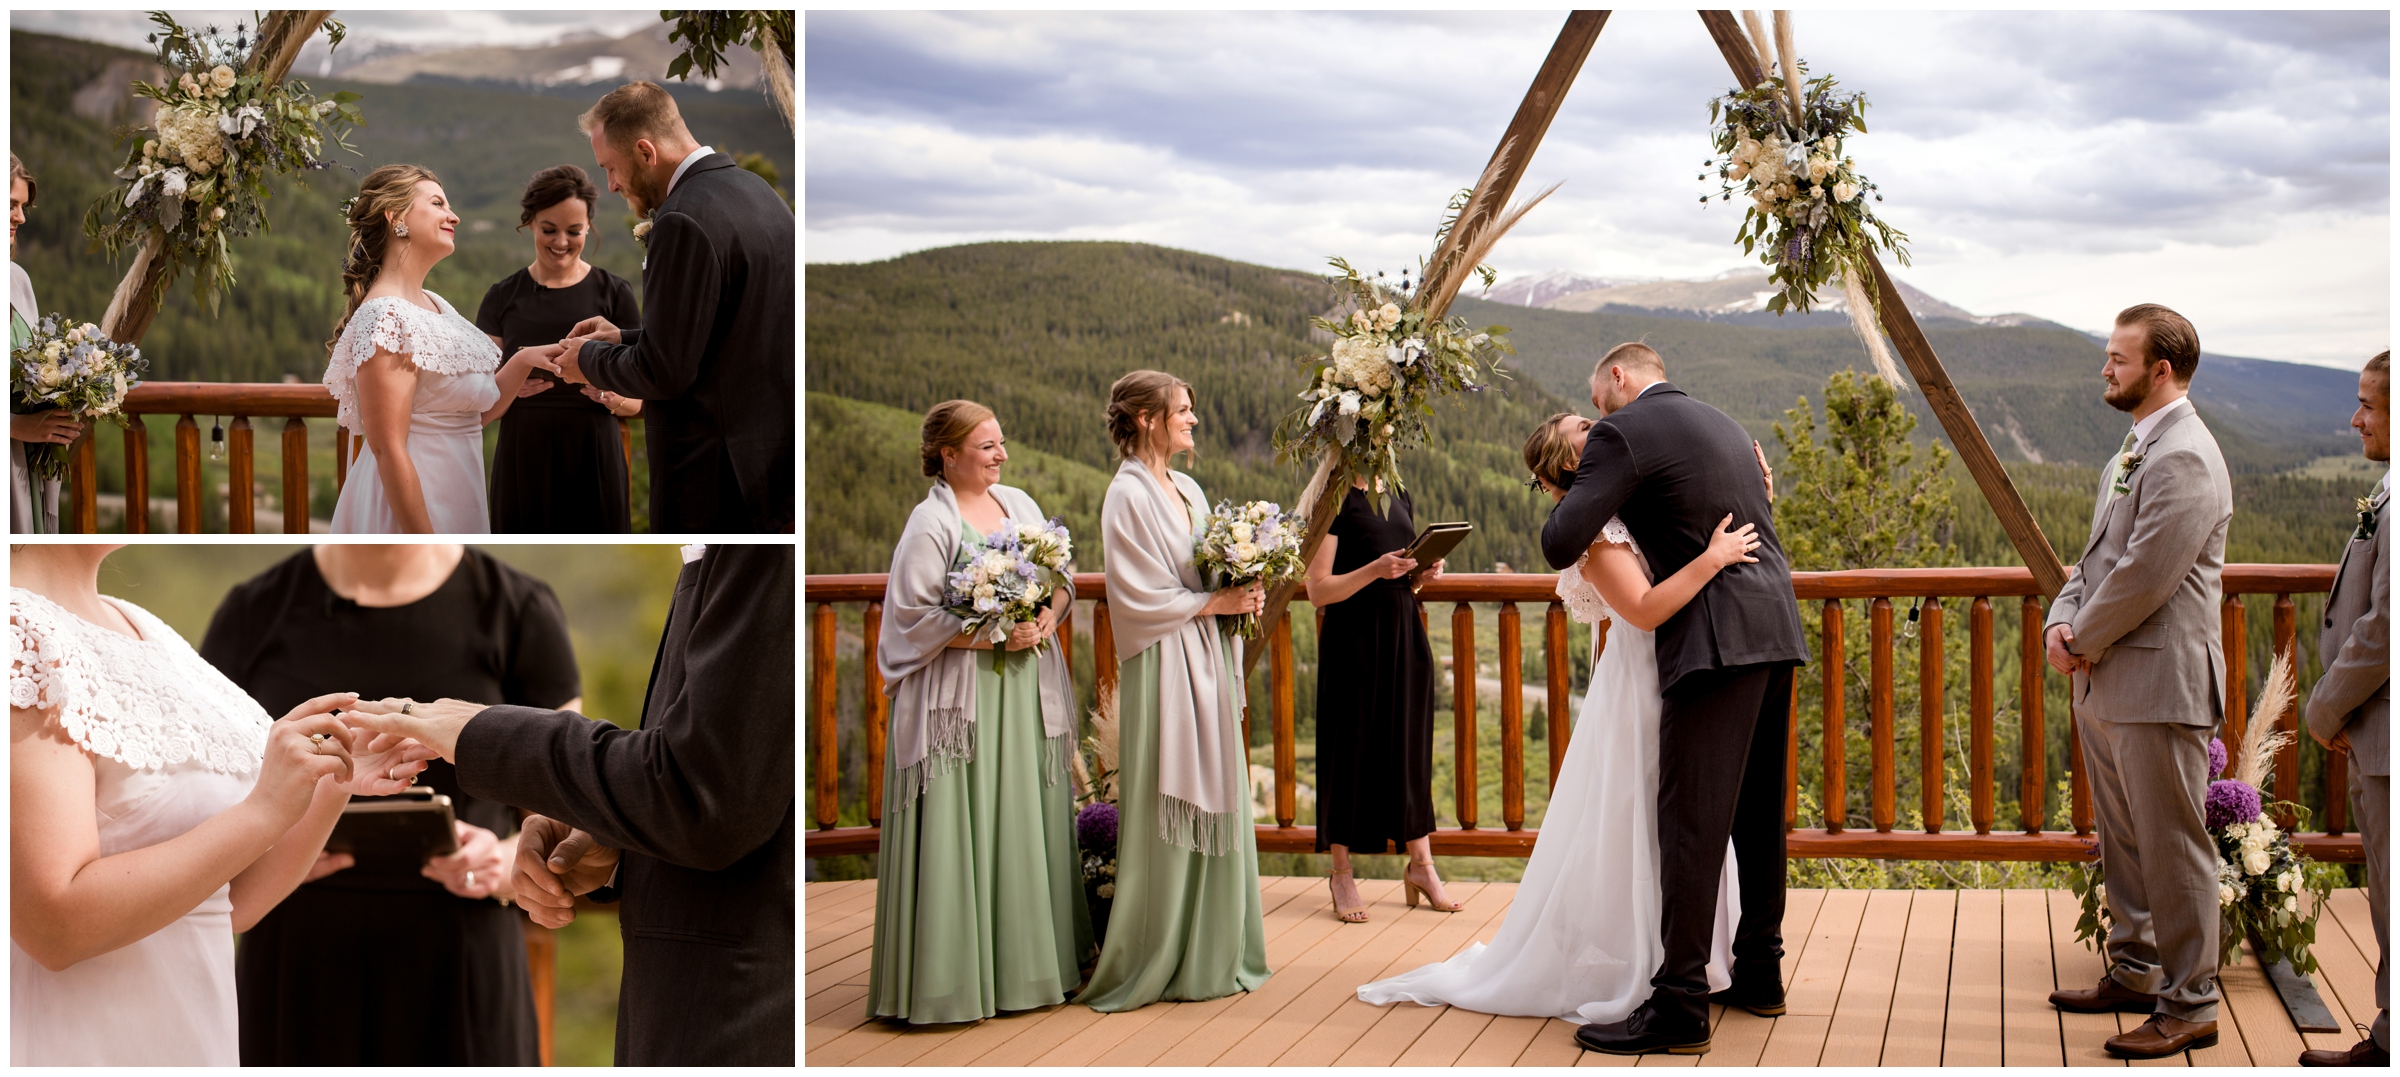 first kiss during outdoor wedding ceremony in Colorado mountains 